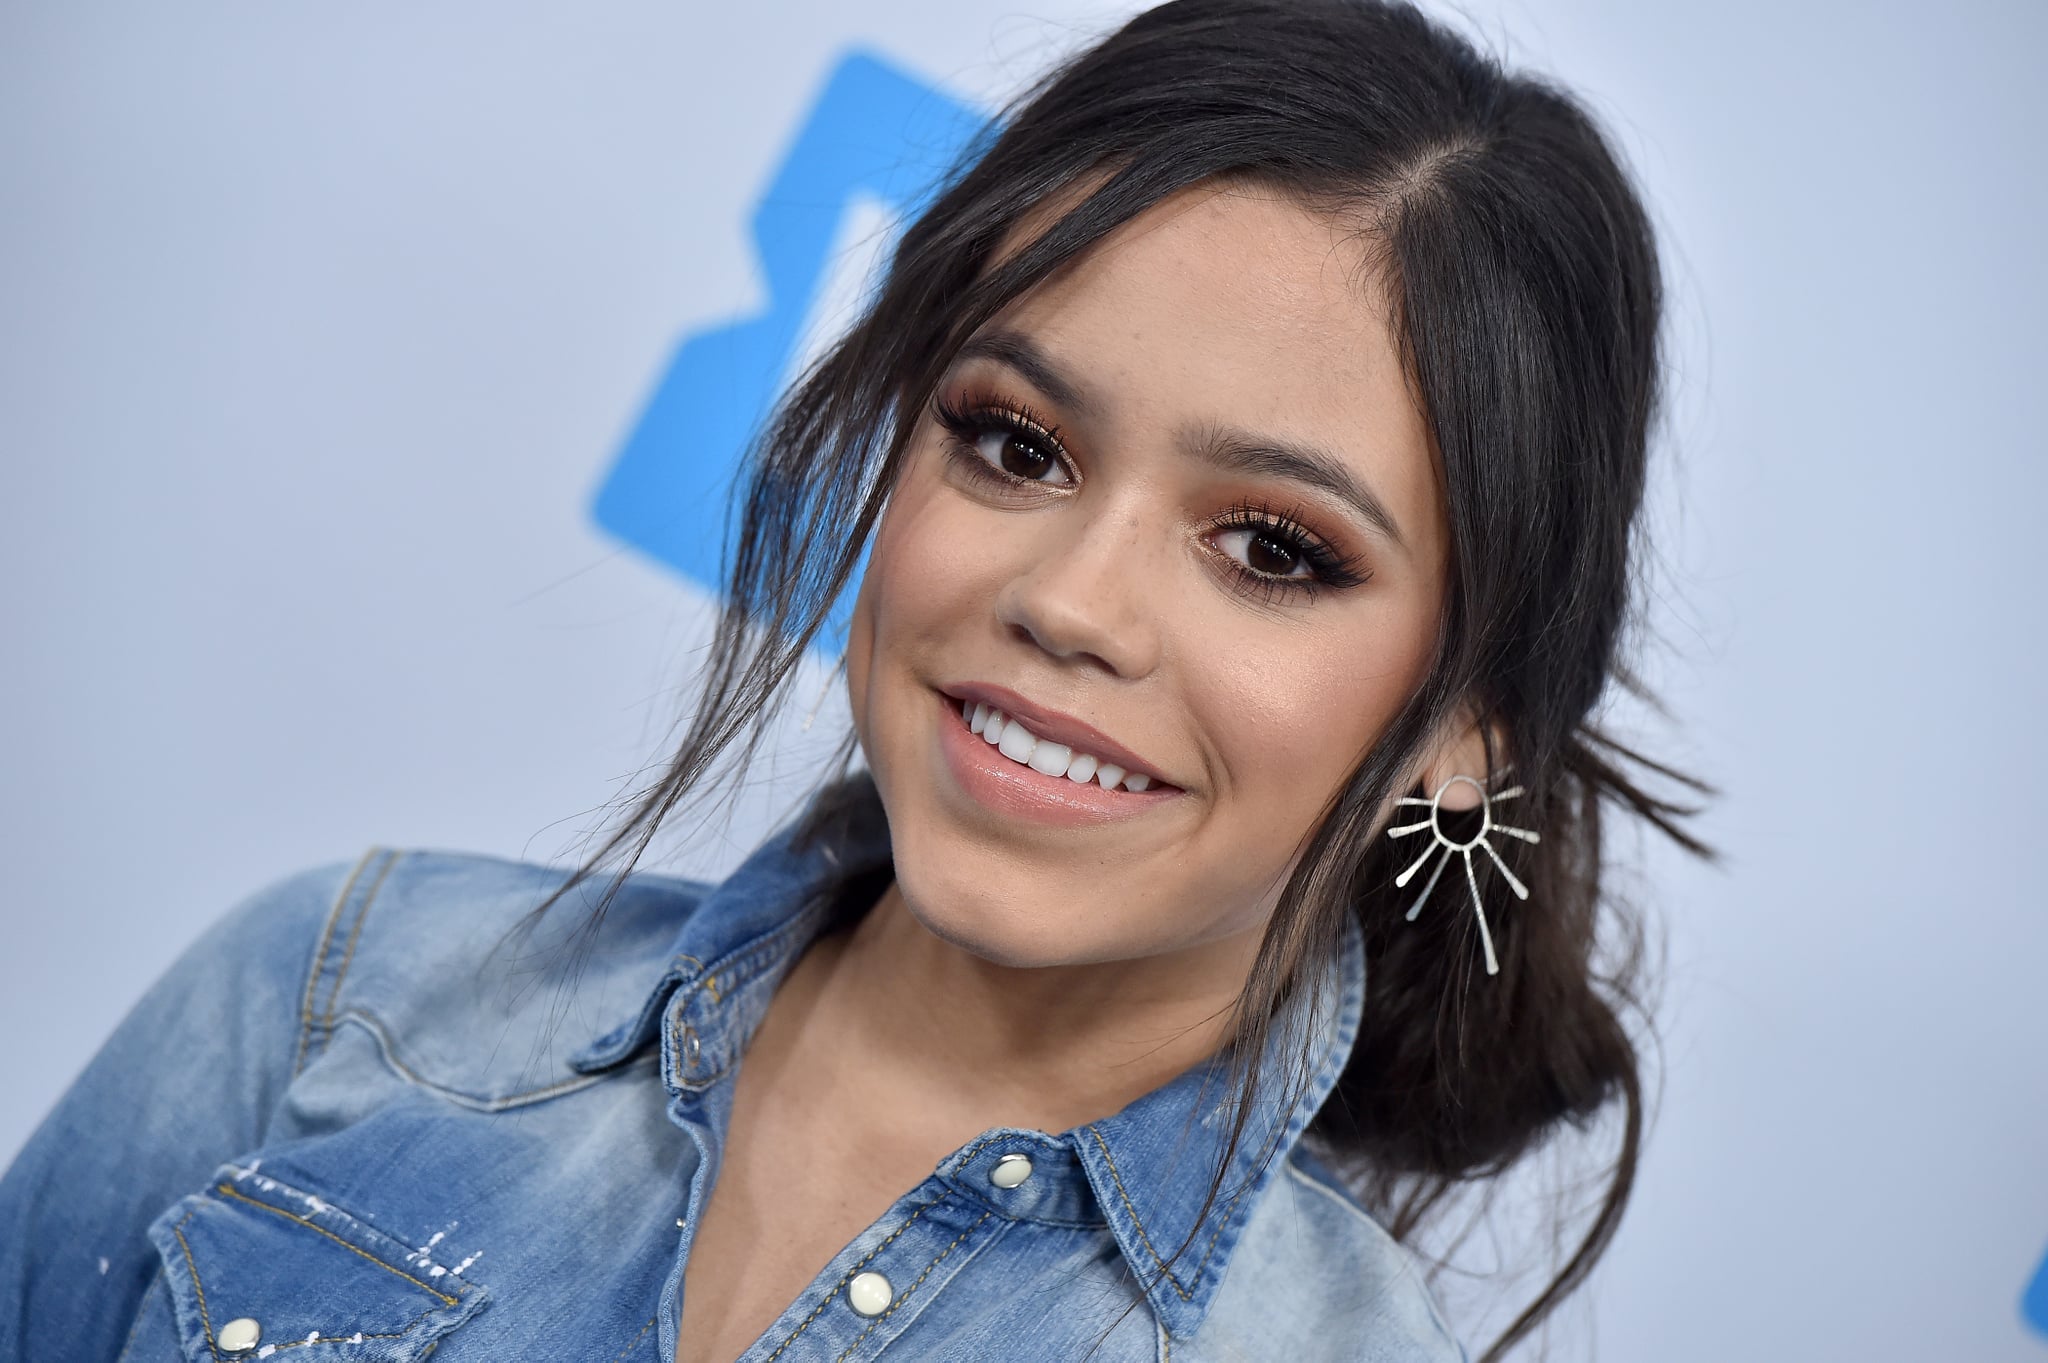 INGLEWOOD, CA - APRIL 19:  Actress Jenna Ortega attends WE Day California at The Forum on April 19, 2018 in Inglewood, California.  (Photo by Axelle/Bauer-Griffin/FilmMagic)